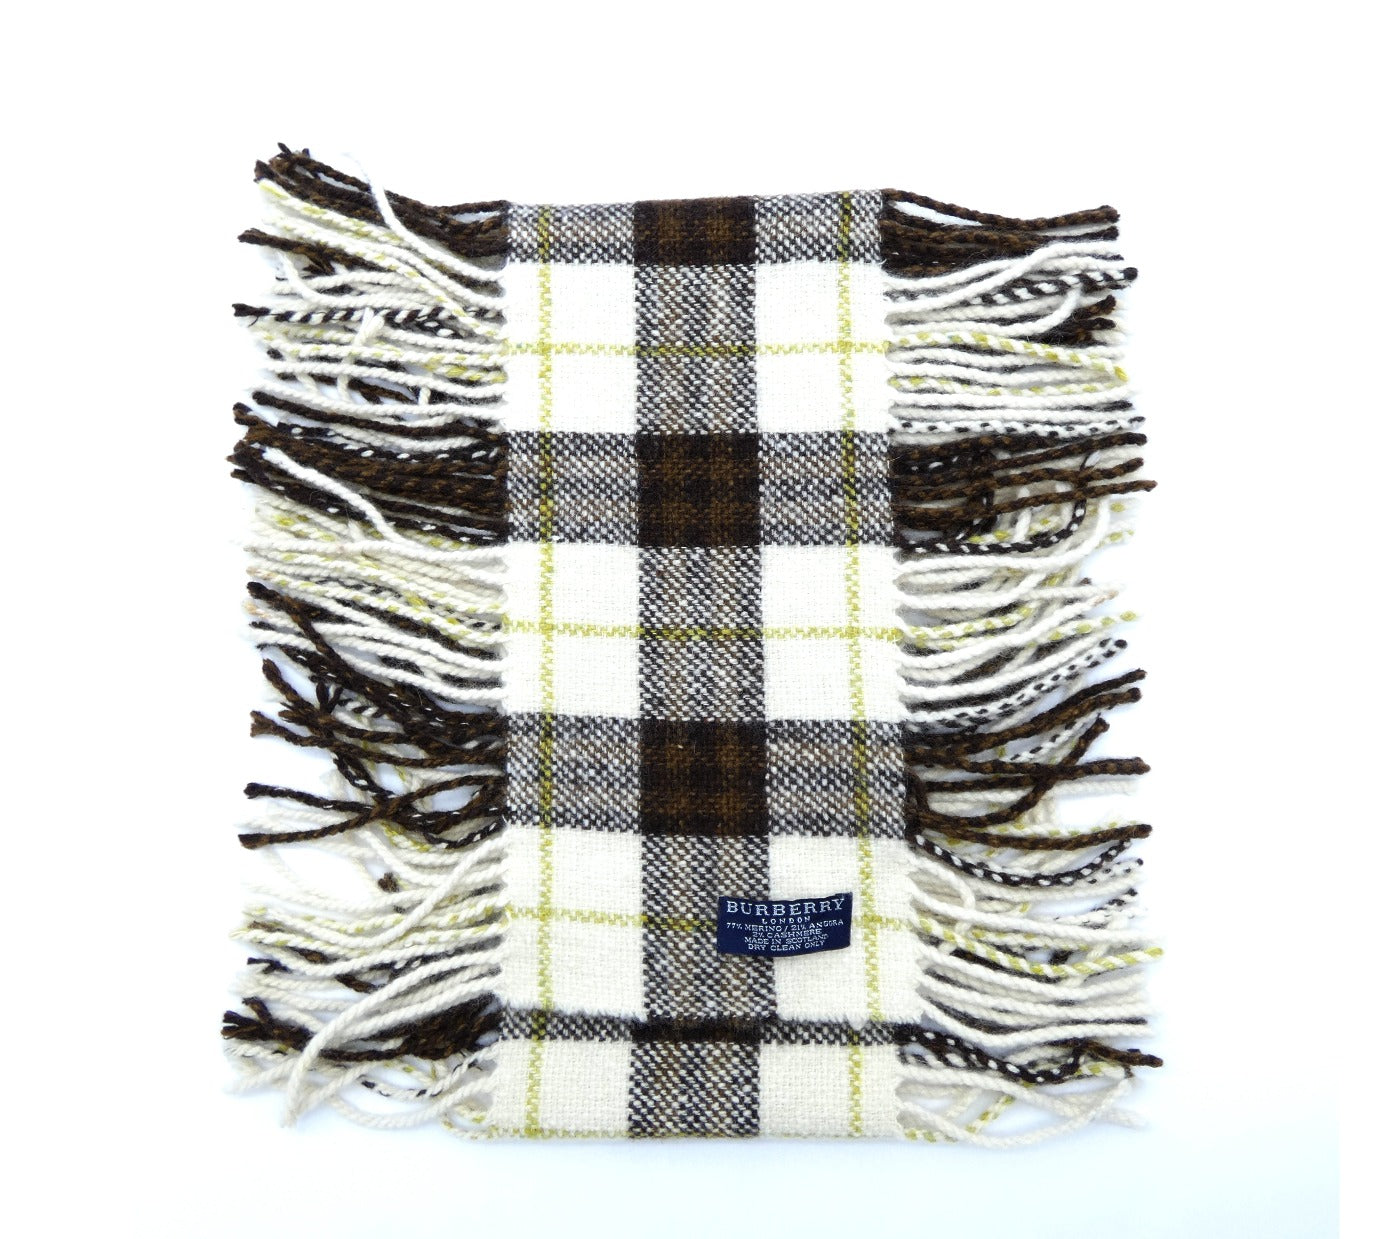 Burberry Wool Angora and Cashmere Brown and Cream Plaid Scarf Scarf Burberry